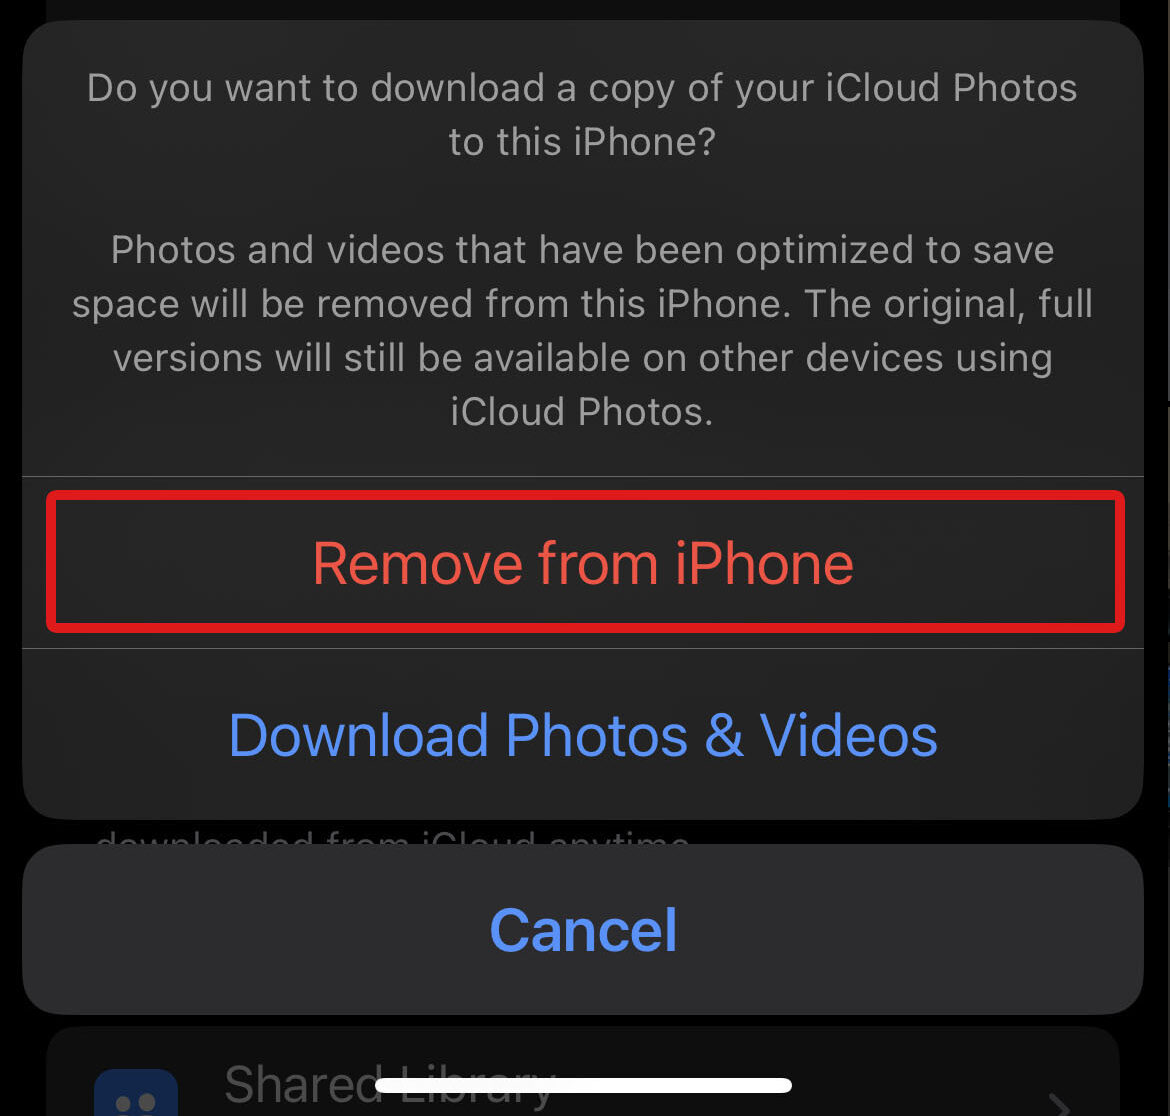 Remove from iPhone